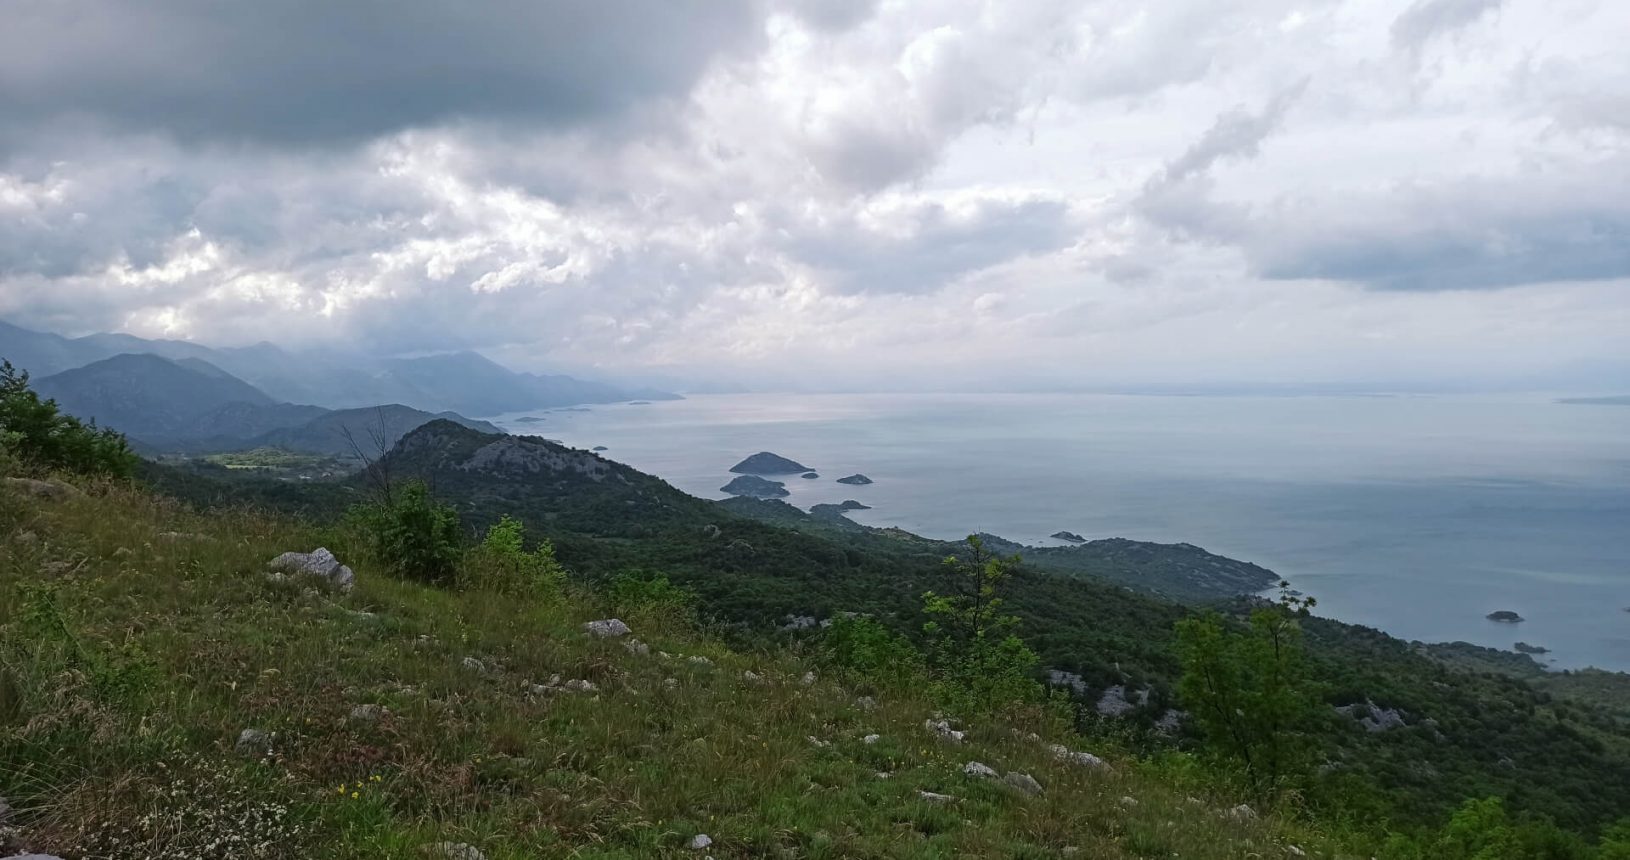 The most stunning view at Viewpoint Shtegvashe